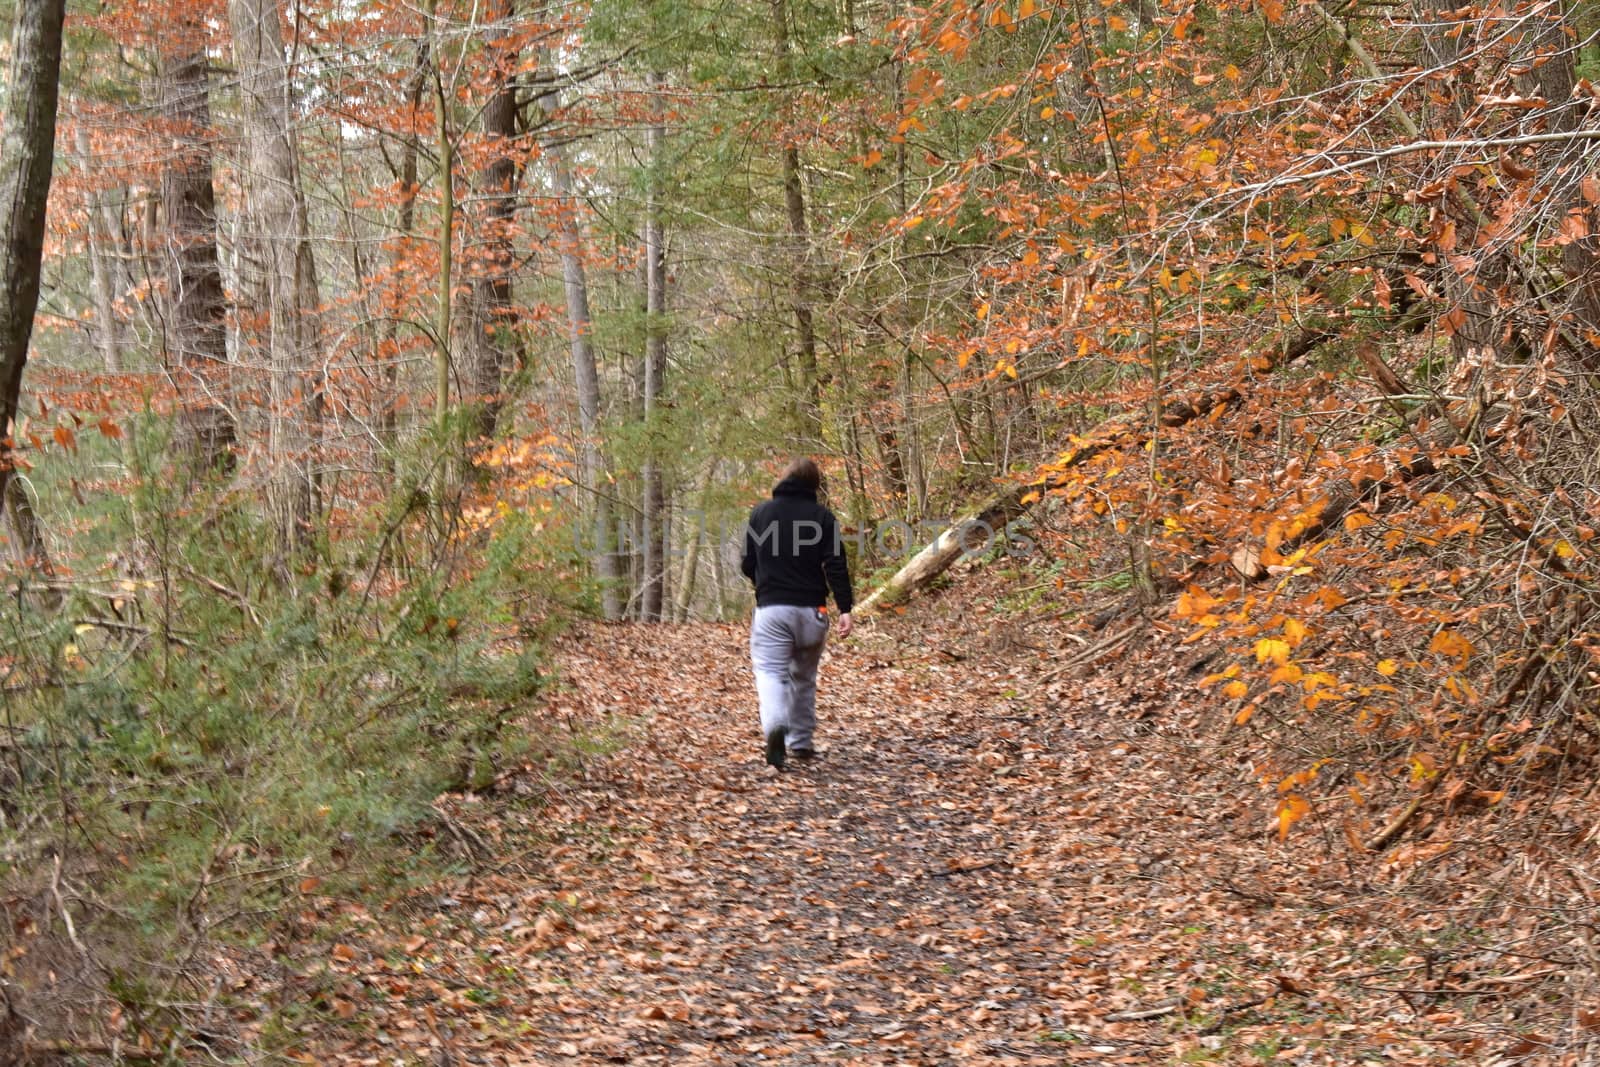 A Man in a Black Hoodie Walking Through an Autumn Forest Covered in Leaves